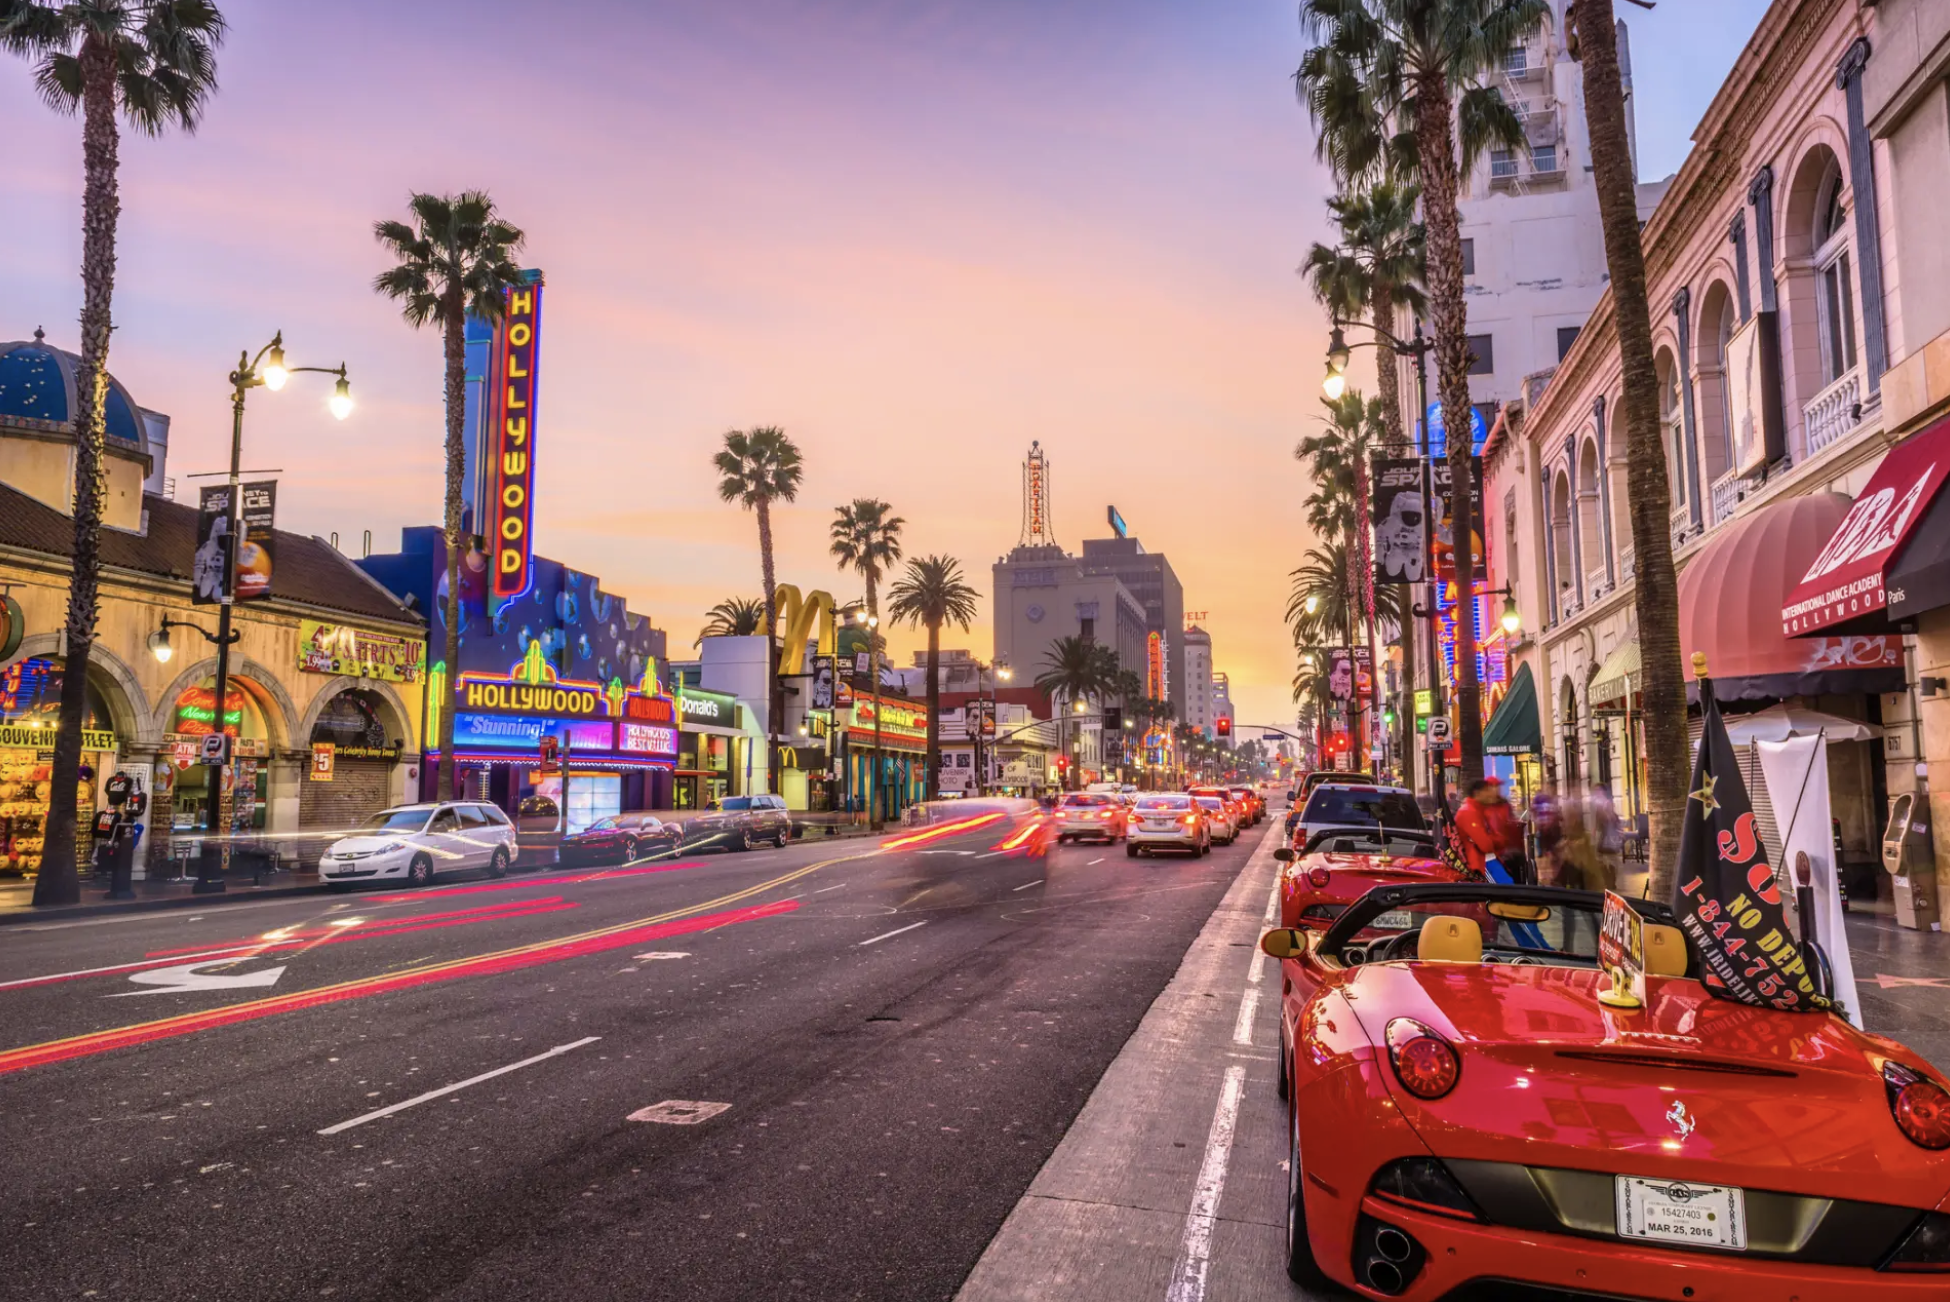 Busy street with neon lights and sunset colors in the sky, painting a beautiful picture of the lively culture along Hollywood Boulevard